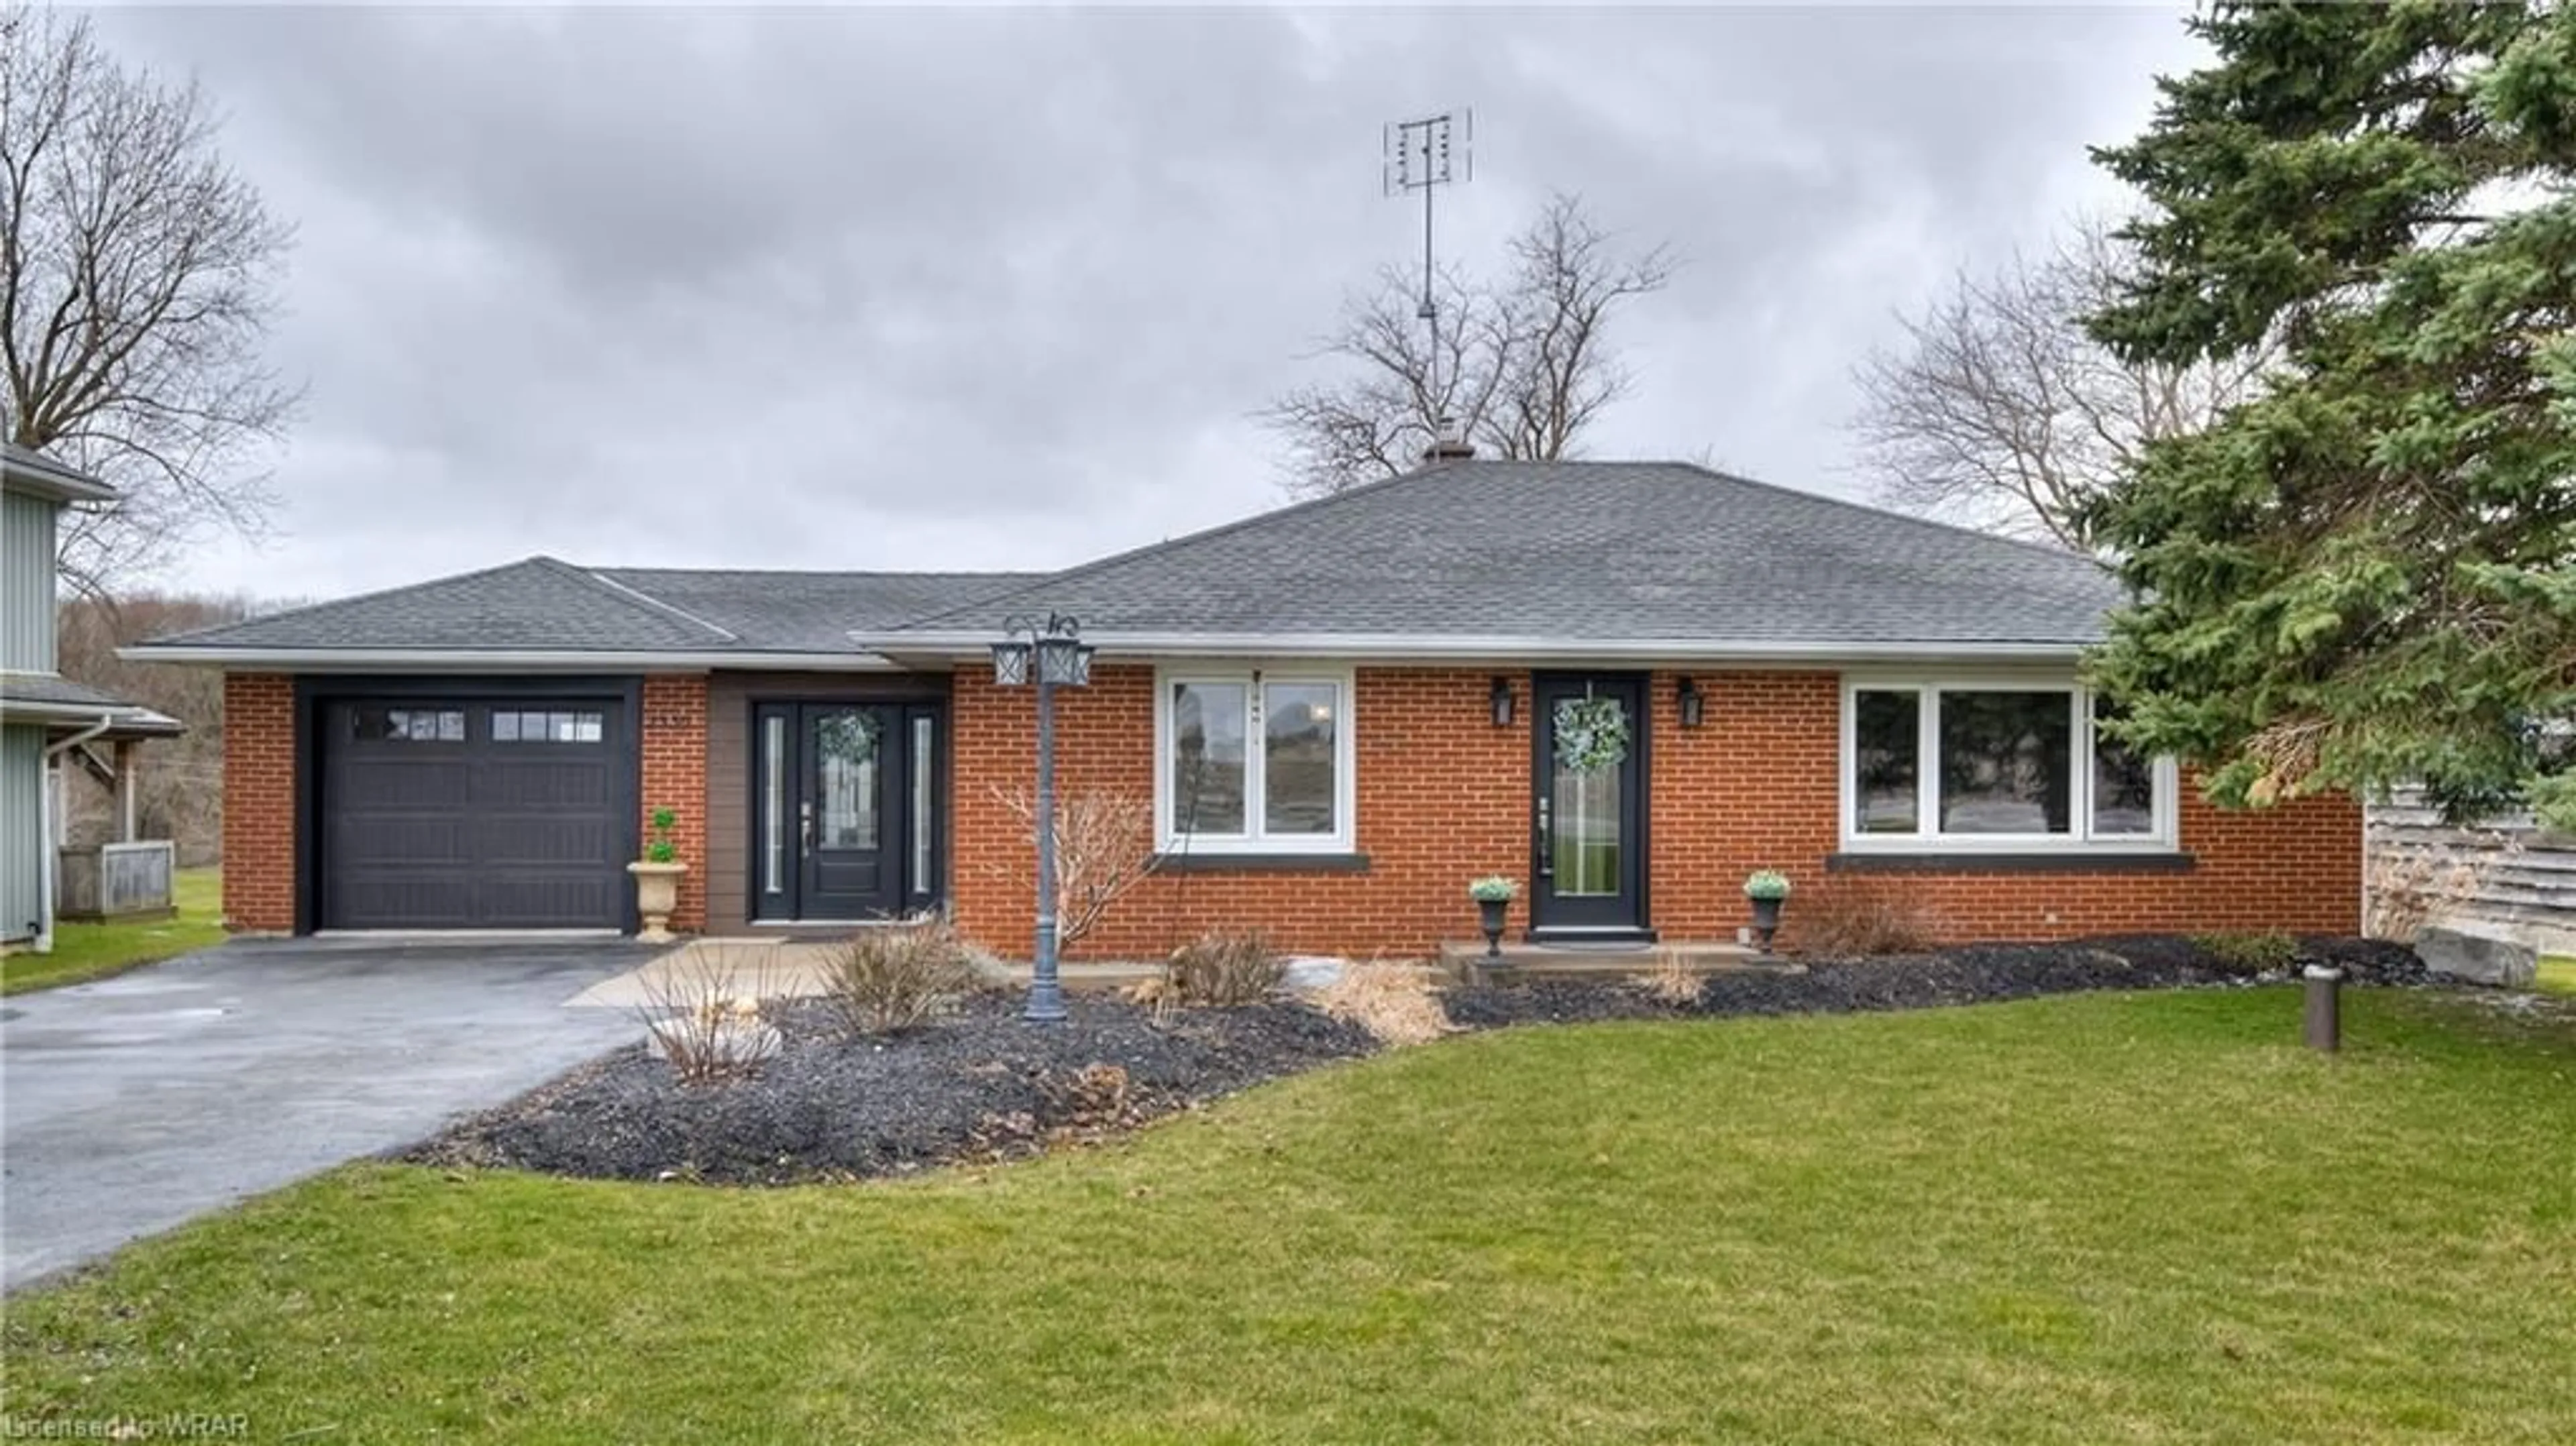 Home with brick exterior material for 2336 Floradale Rd, Floradale Ontario N0B 1V0